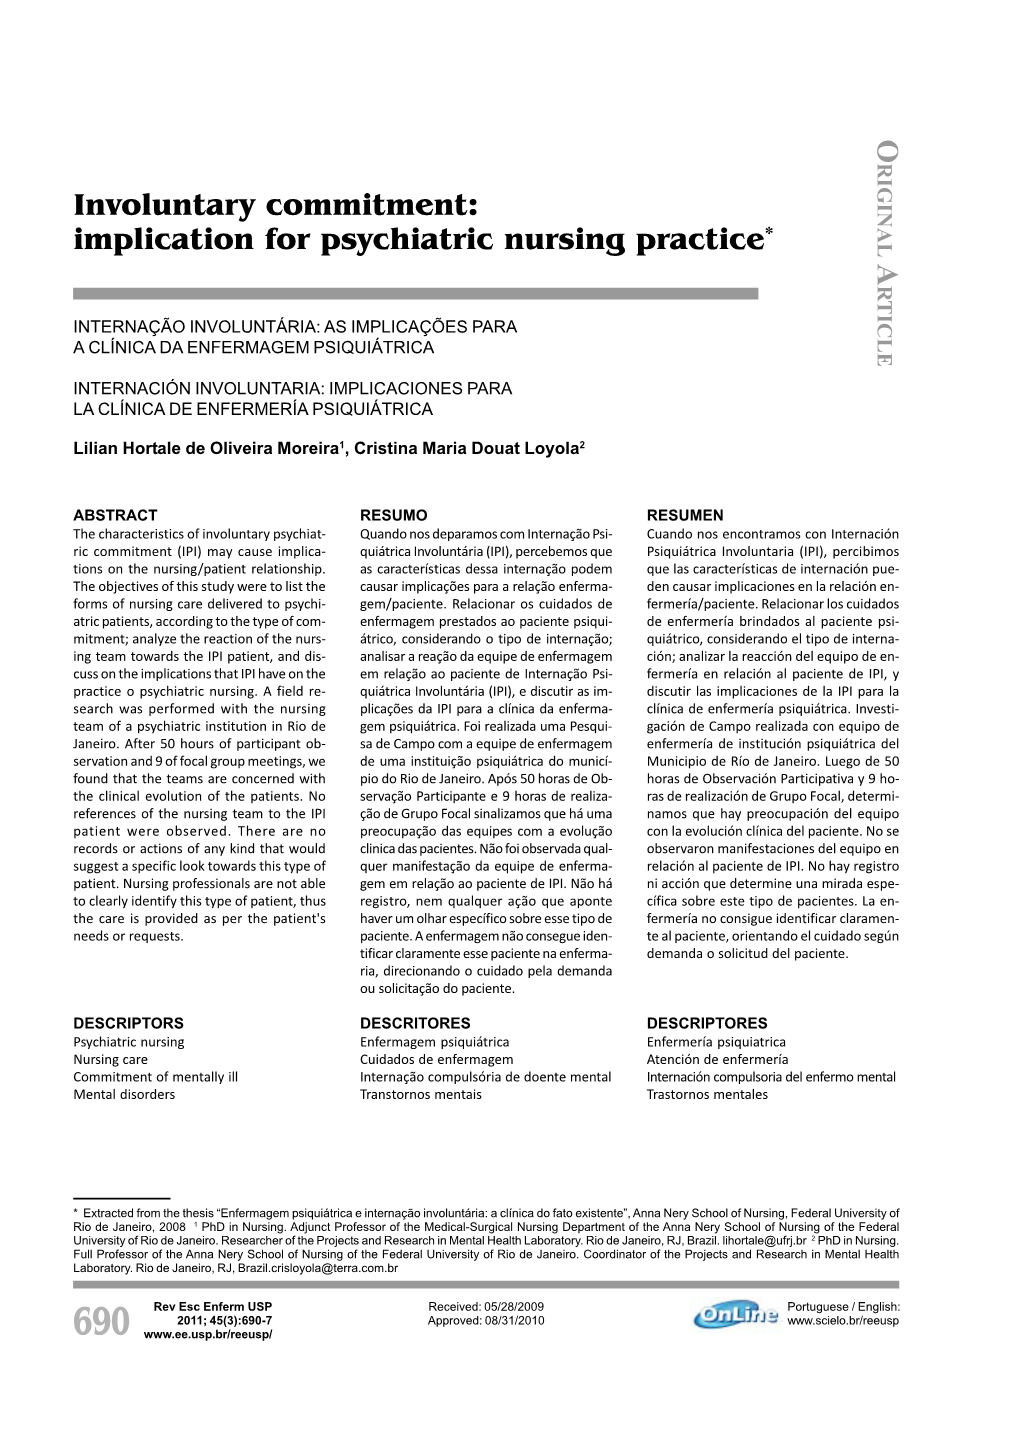 Involuntary Commitment: Implication for Psychiatric Nursing Practice* a RTICLE